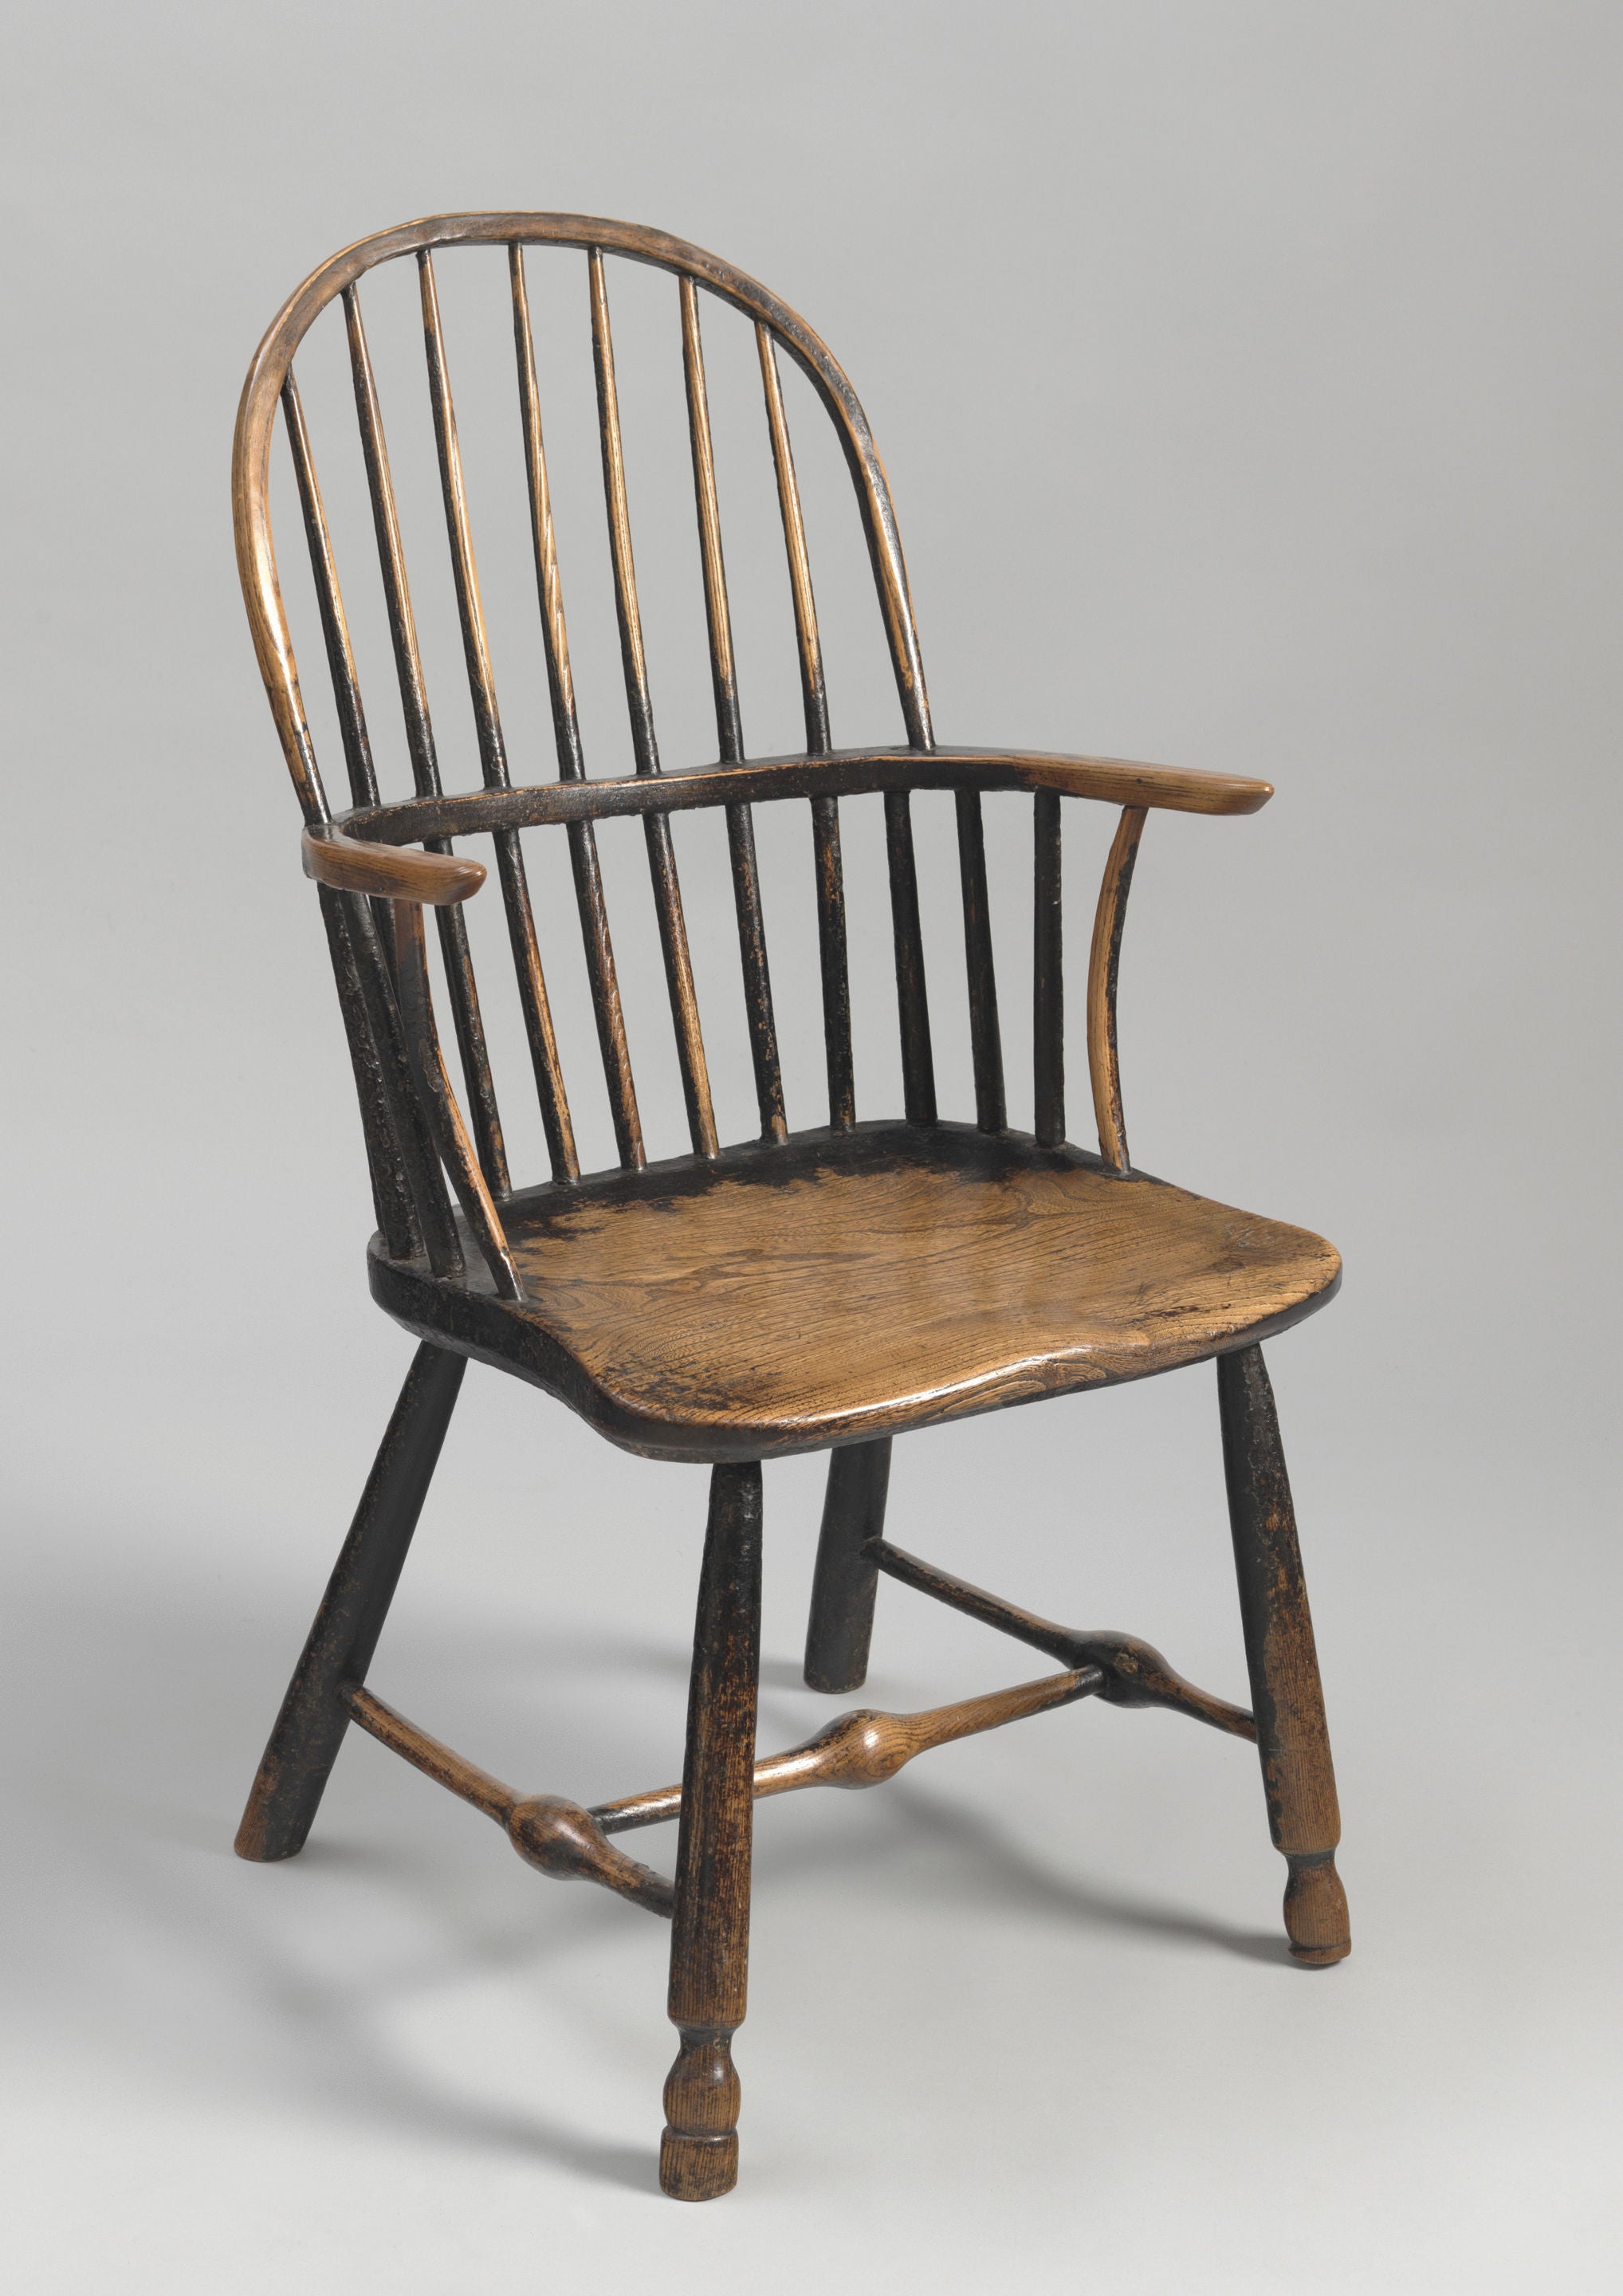 George III Period Primitive Bow Backed Windsor Armchair.